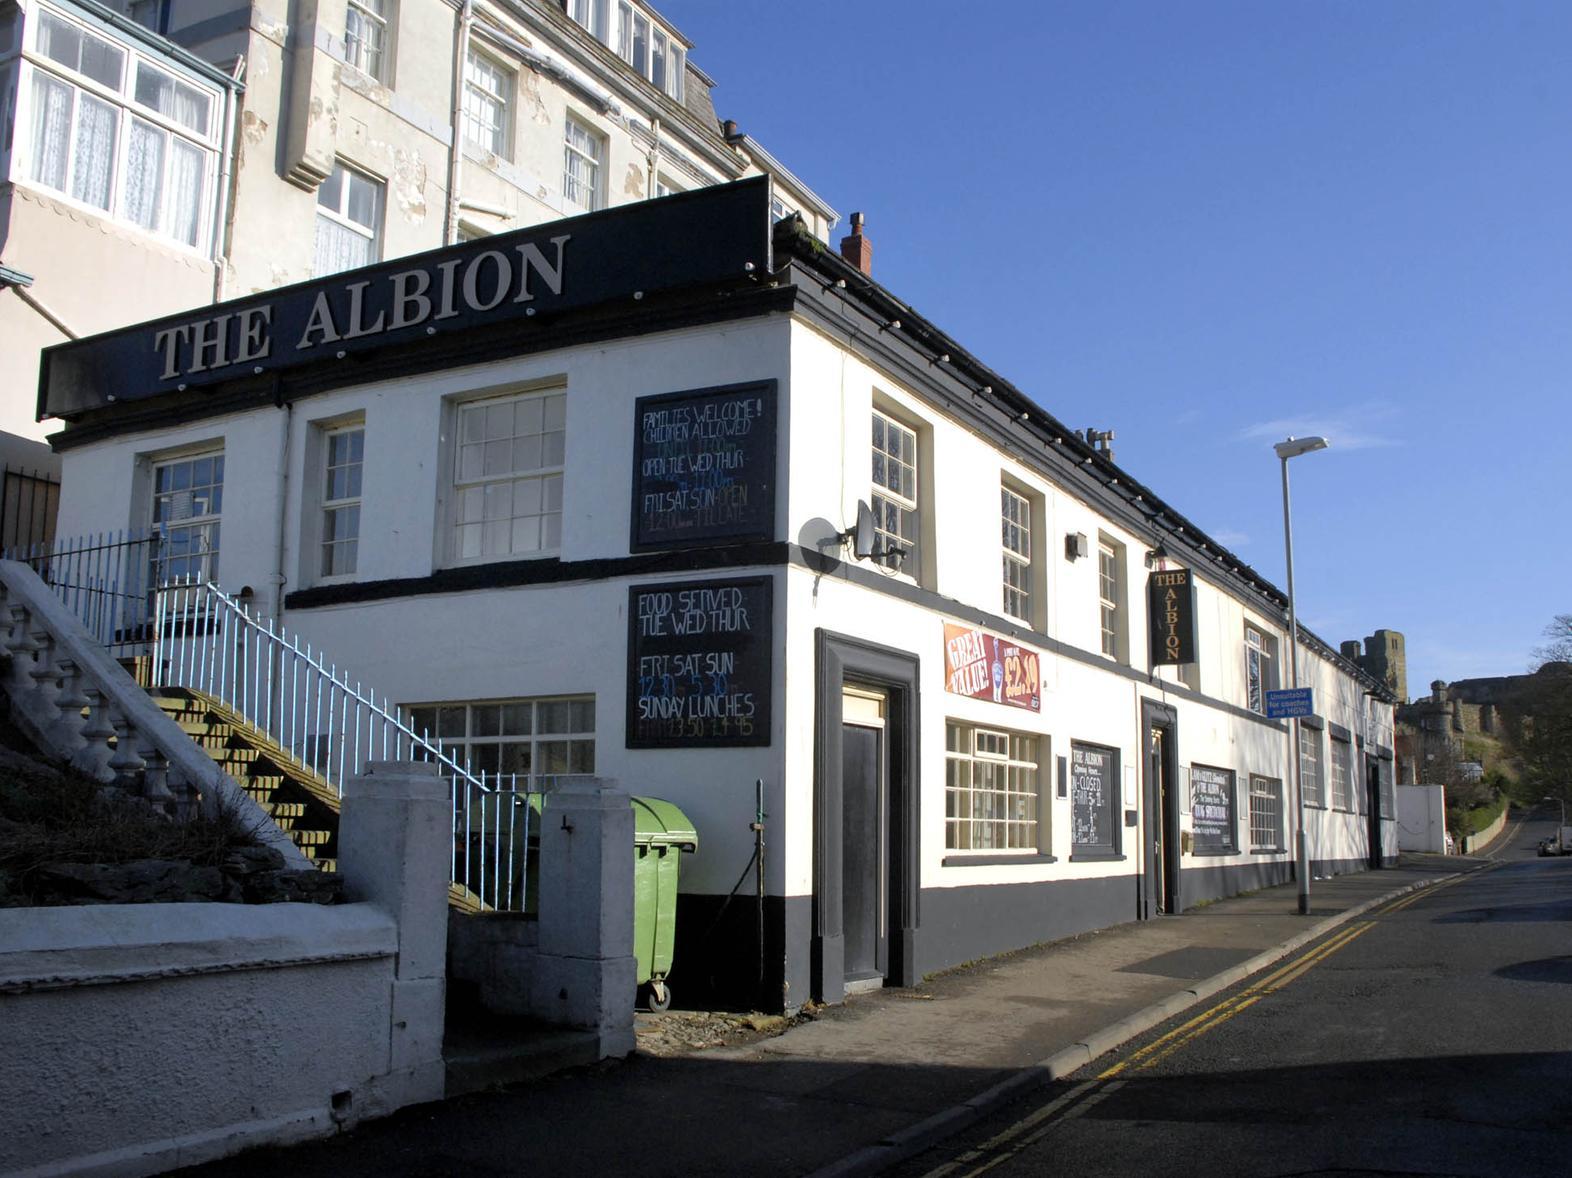 The Albion, at 136 Castle Road, is now holiday lets.